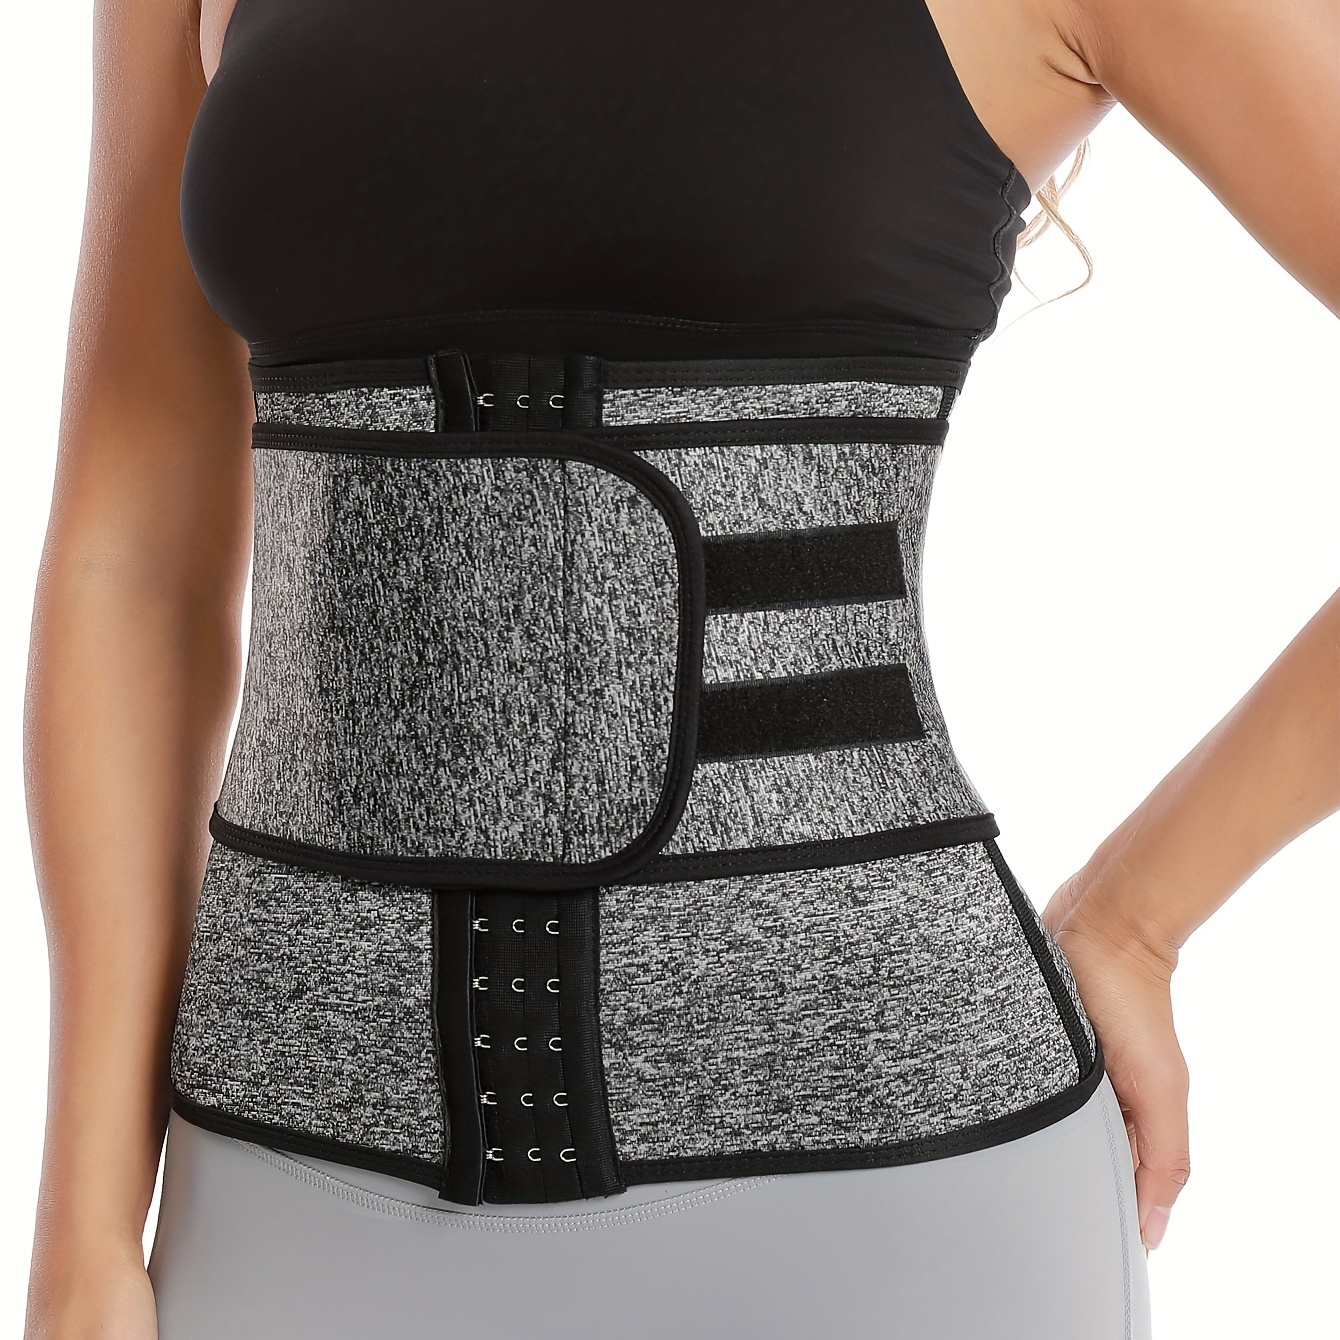 ShapEager Girdle Midsection Trainer Flatten Love Handles Back Support  Slimming Stomach Wrap Sweat Belt Triple-Adjustment Velcro Bands Black at   Women's Clothing store